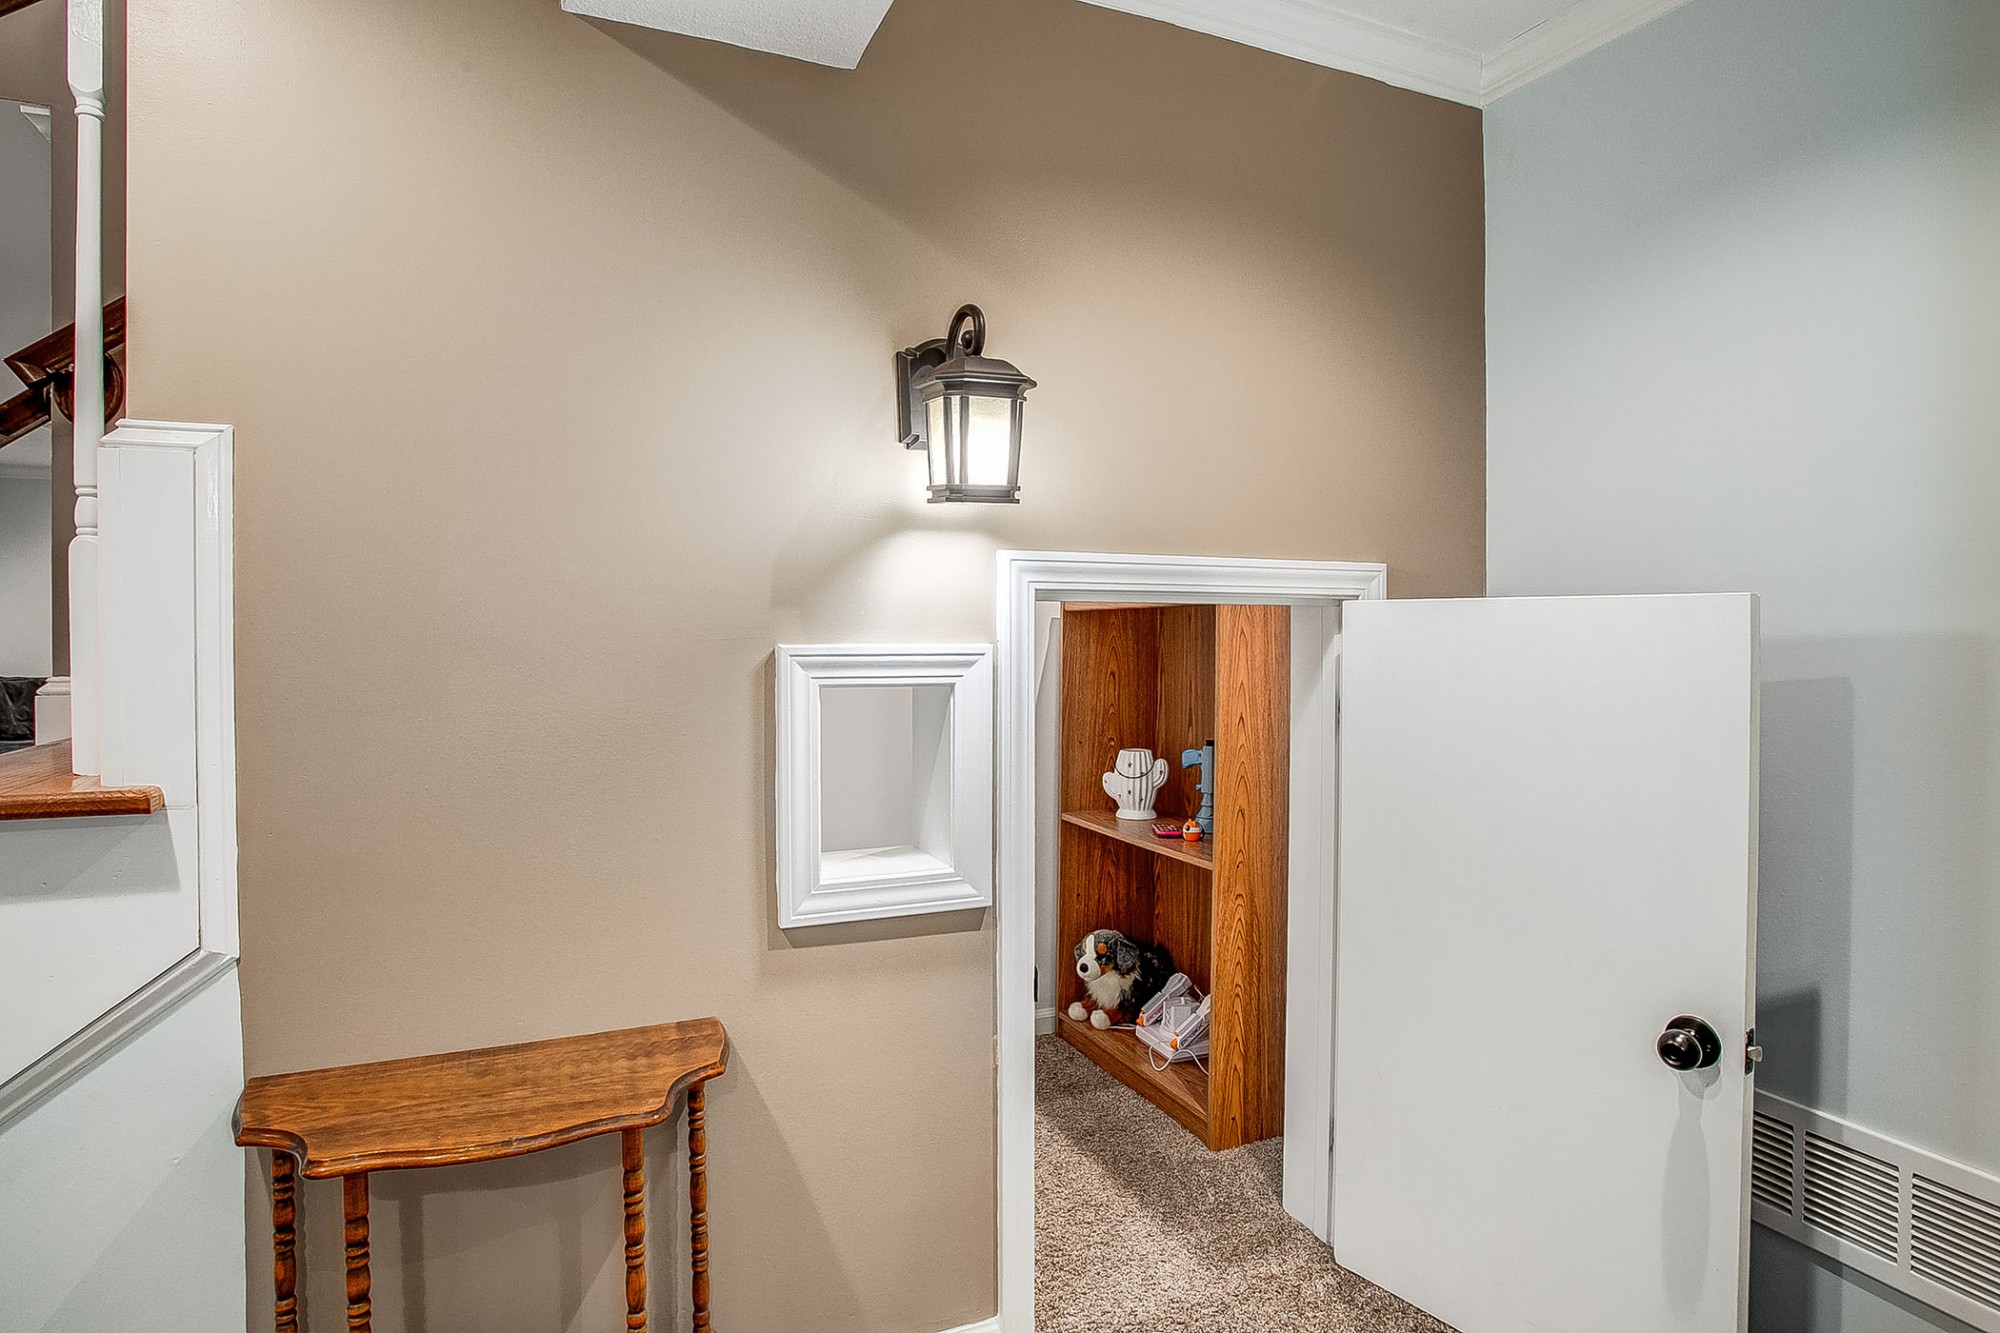 Beneath the staircase is an enchanting and quaint playhouse with its own window and porch light, perfect for little imaginations.